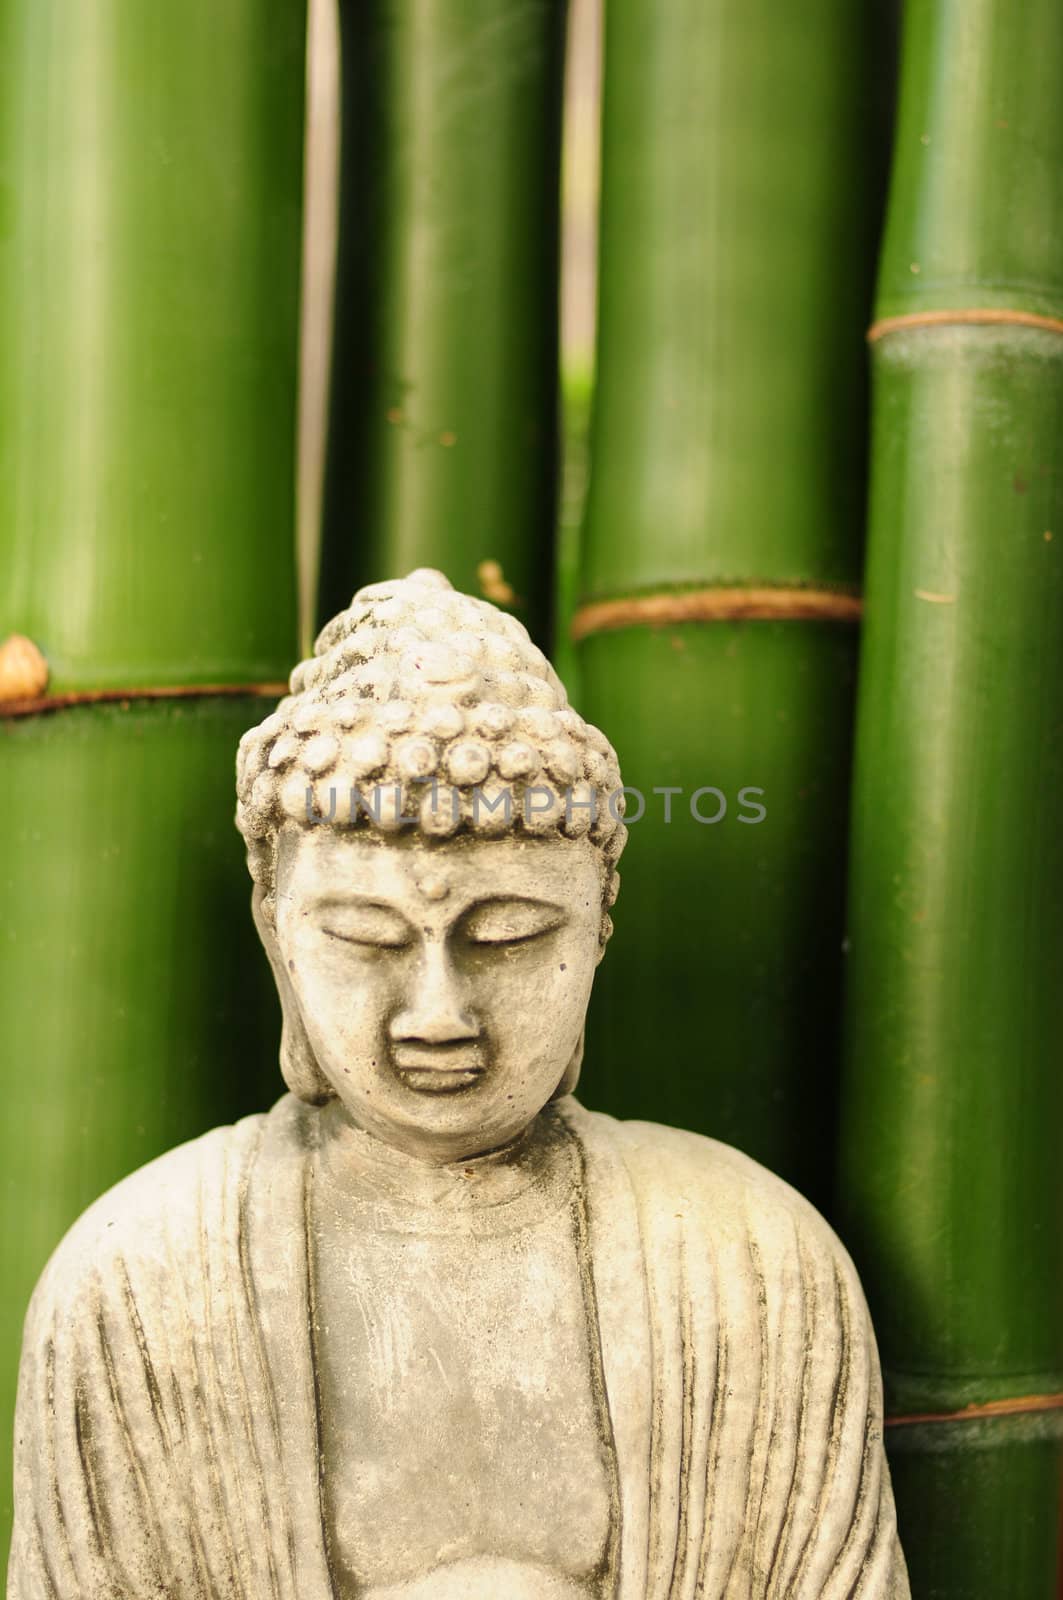 Buddha statue with bamboo in background by ftlaudgirl